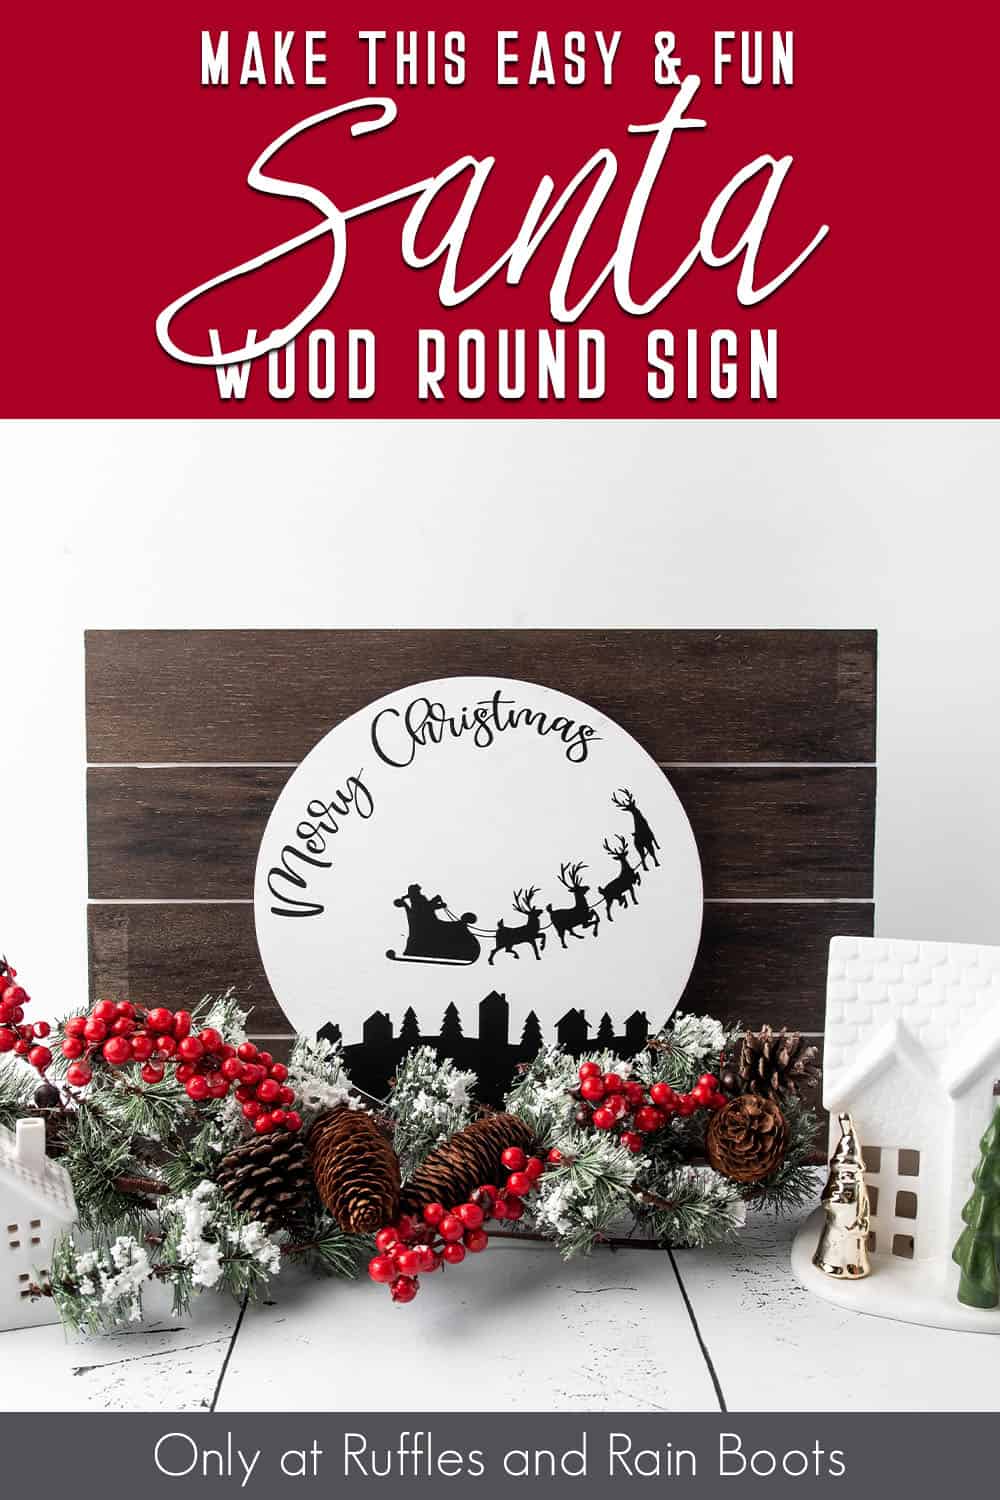 Free Merry Christmas SVG for round Christmas sign made with Cricut or Silhouette.